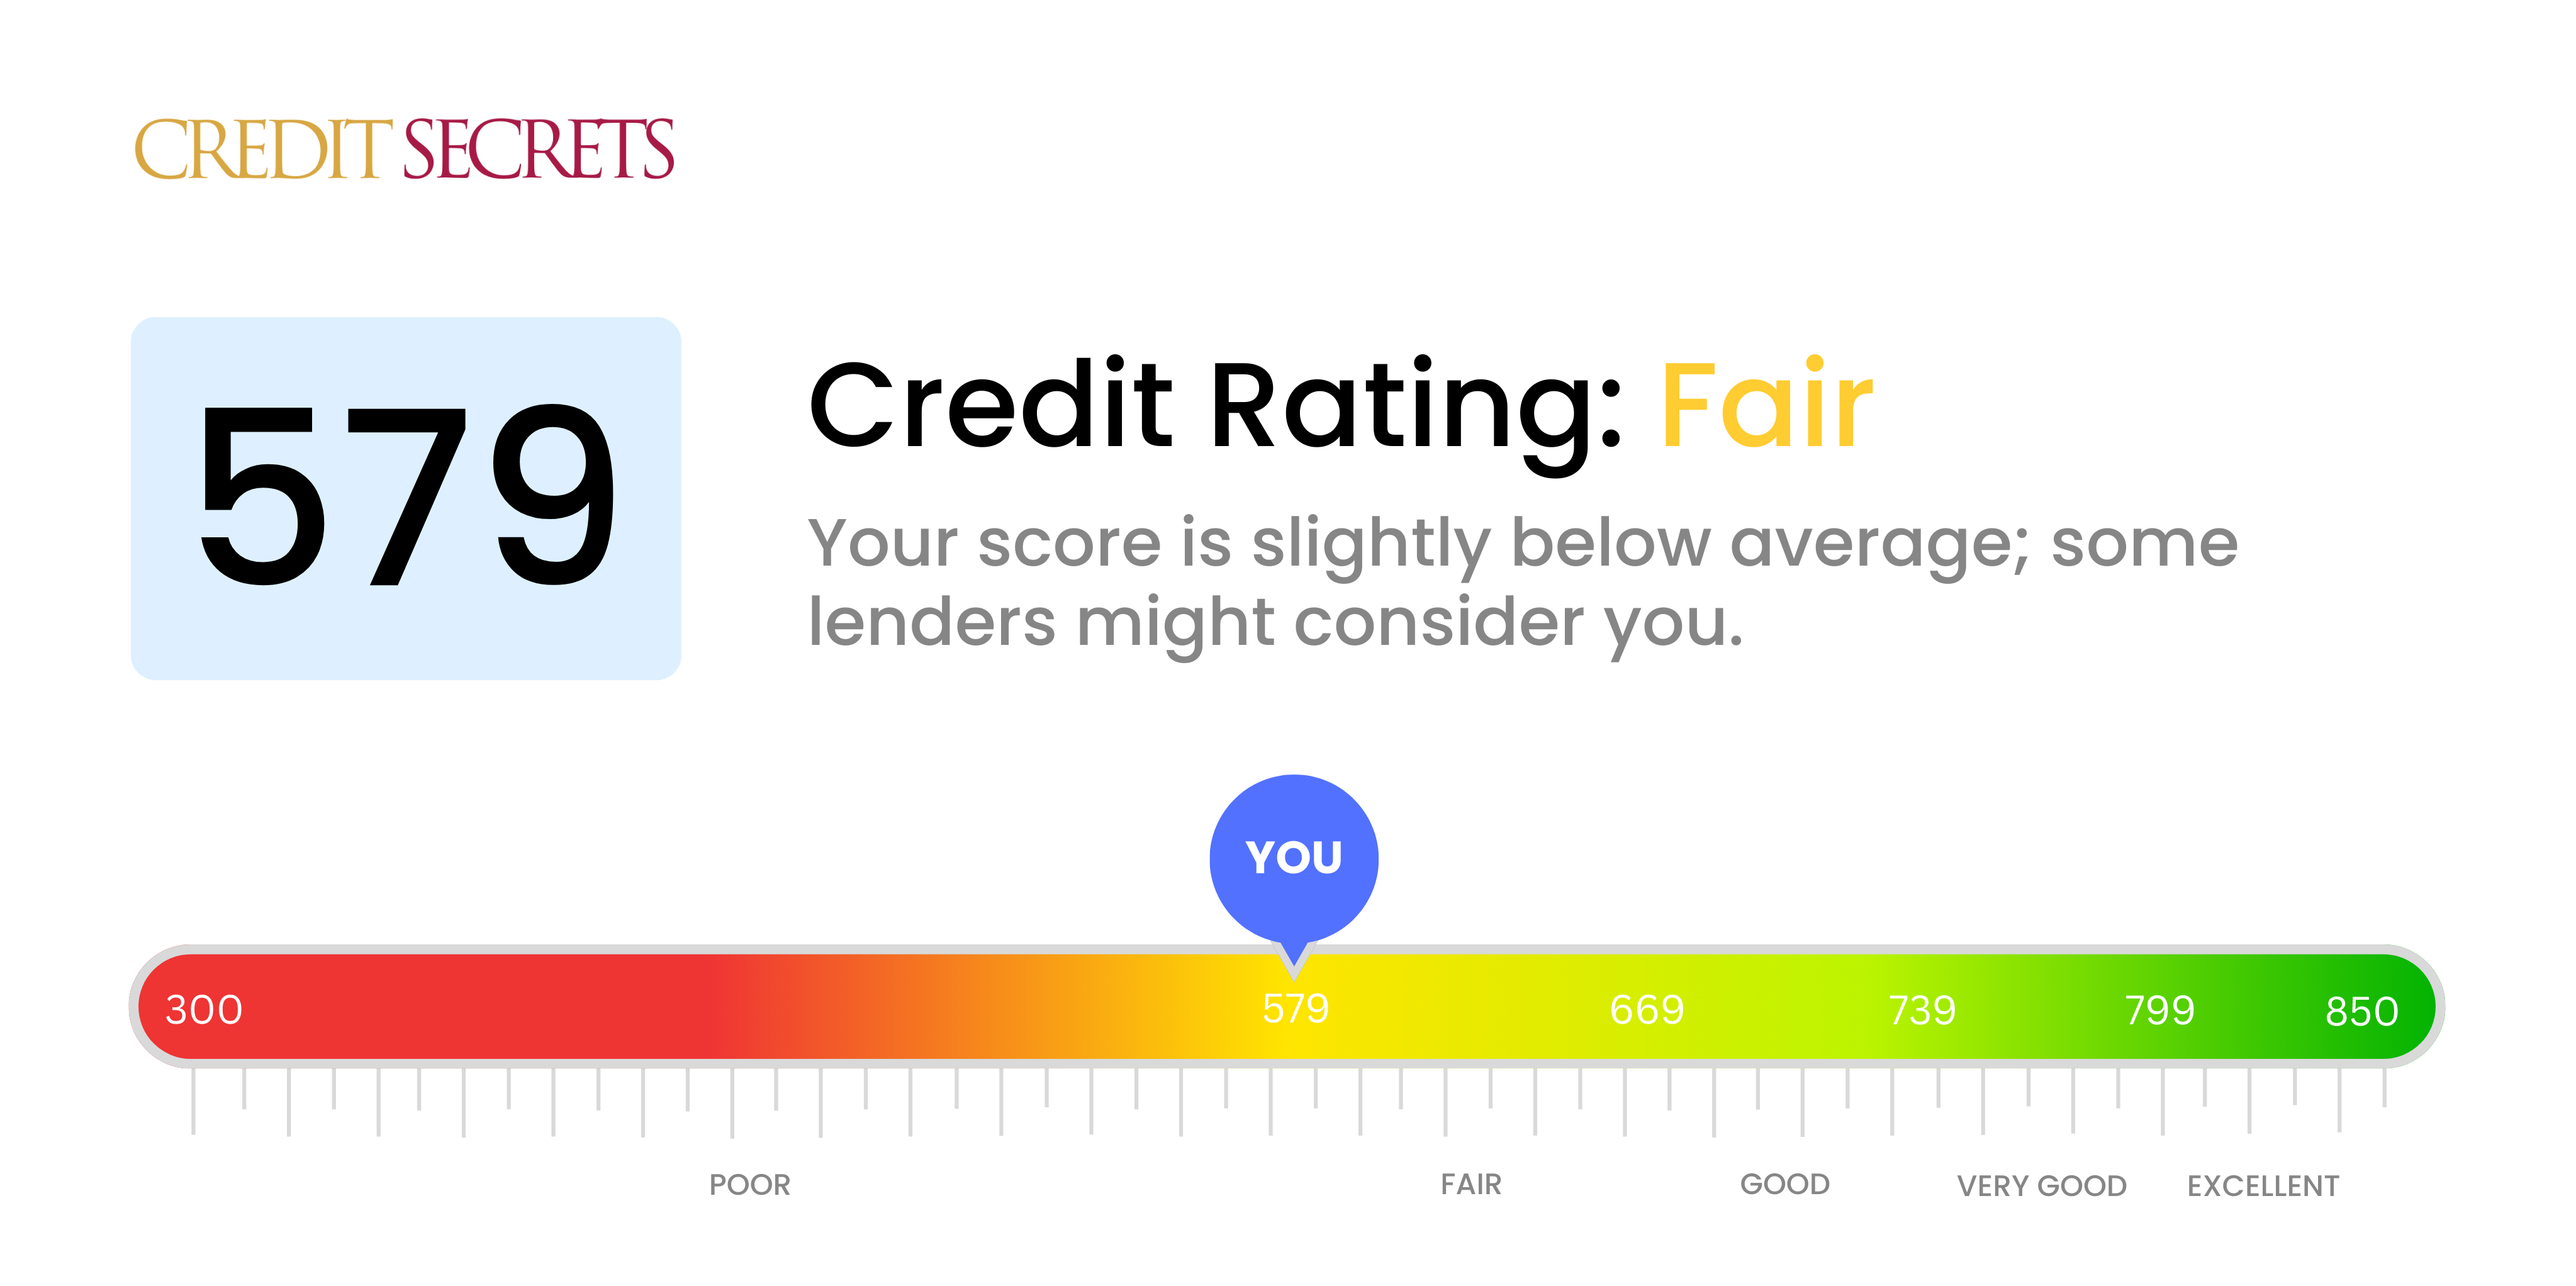 Is 579 a good credit score?